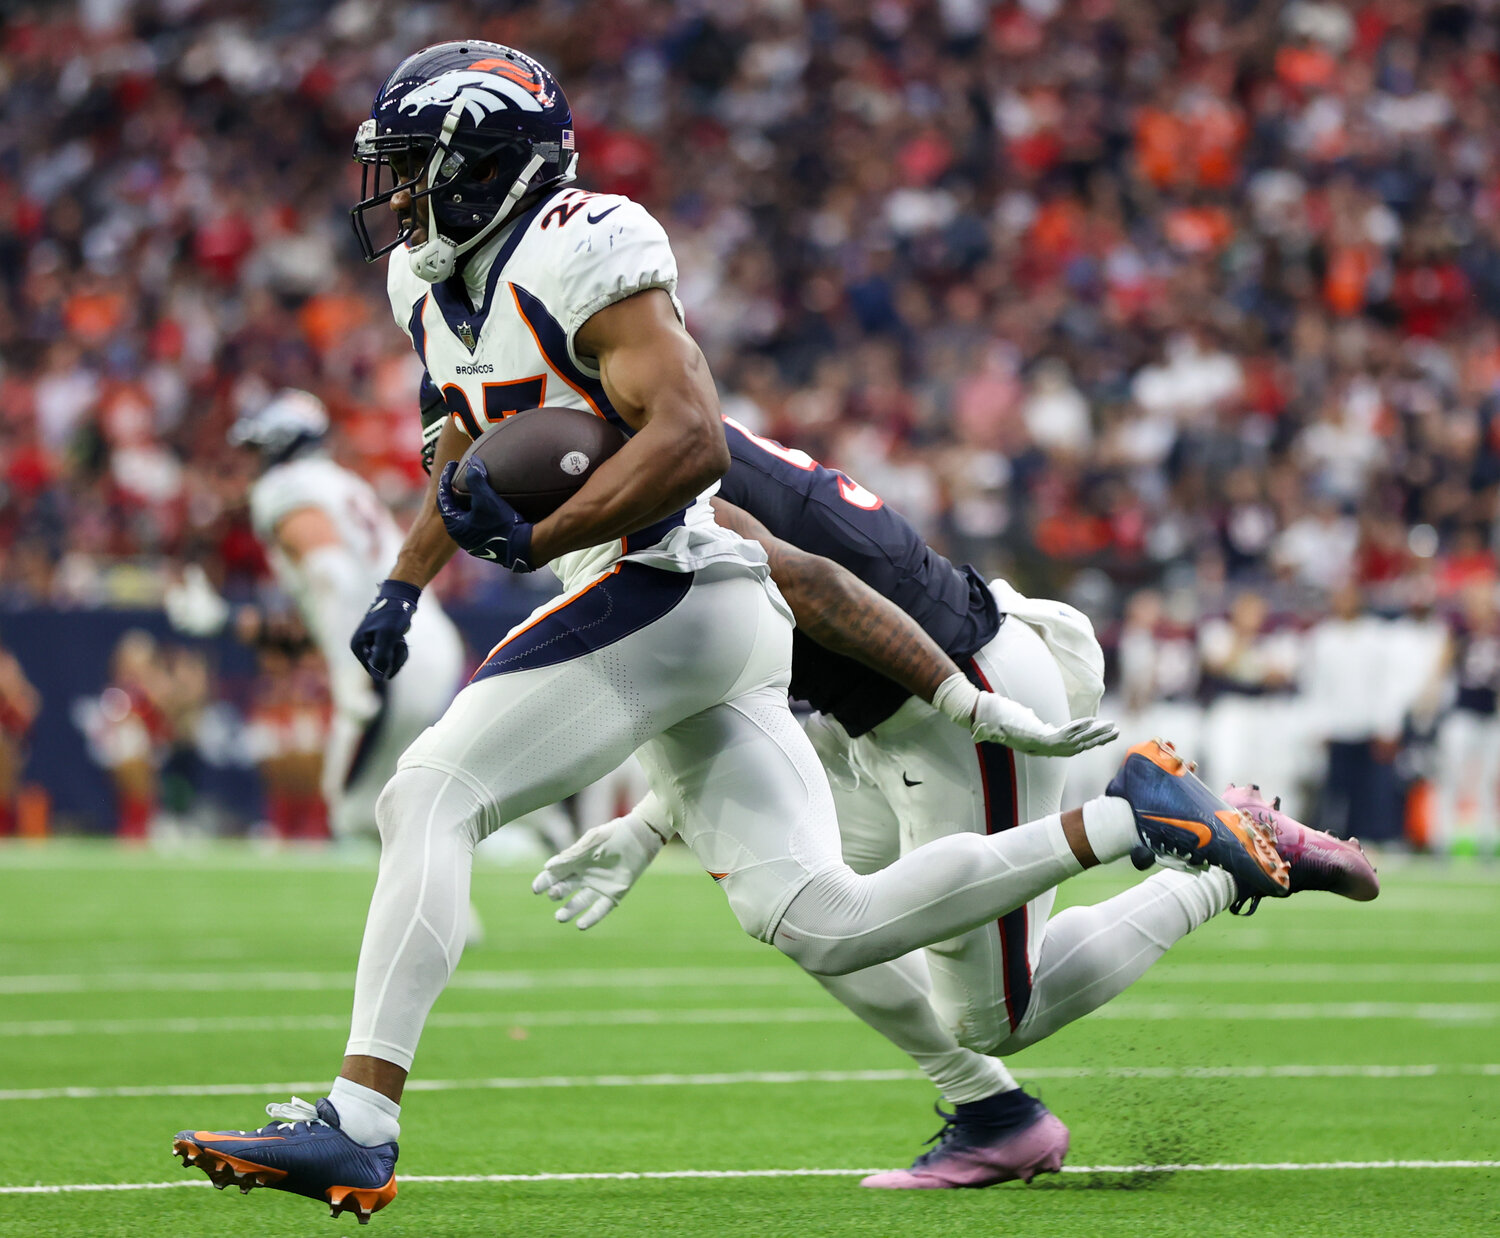 Broncos cornerback Fabian Moreau (23) returns an intercepted pass on a two-point conversion attempt during an NFL game between the Texans and the Broncos on December 3, 2023 in Houston. The Texans won, 22-17.